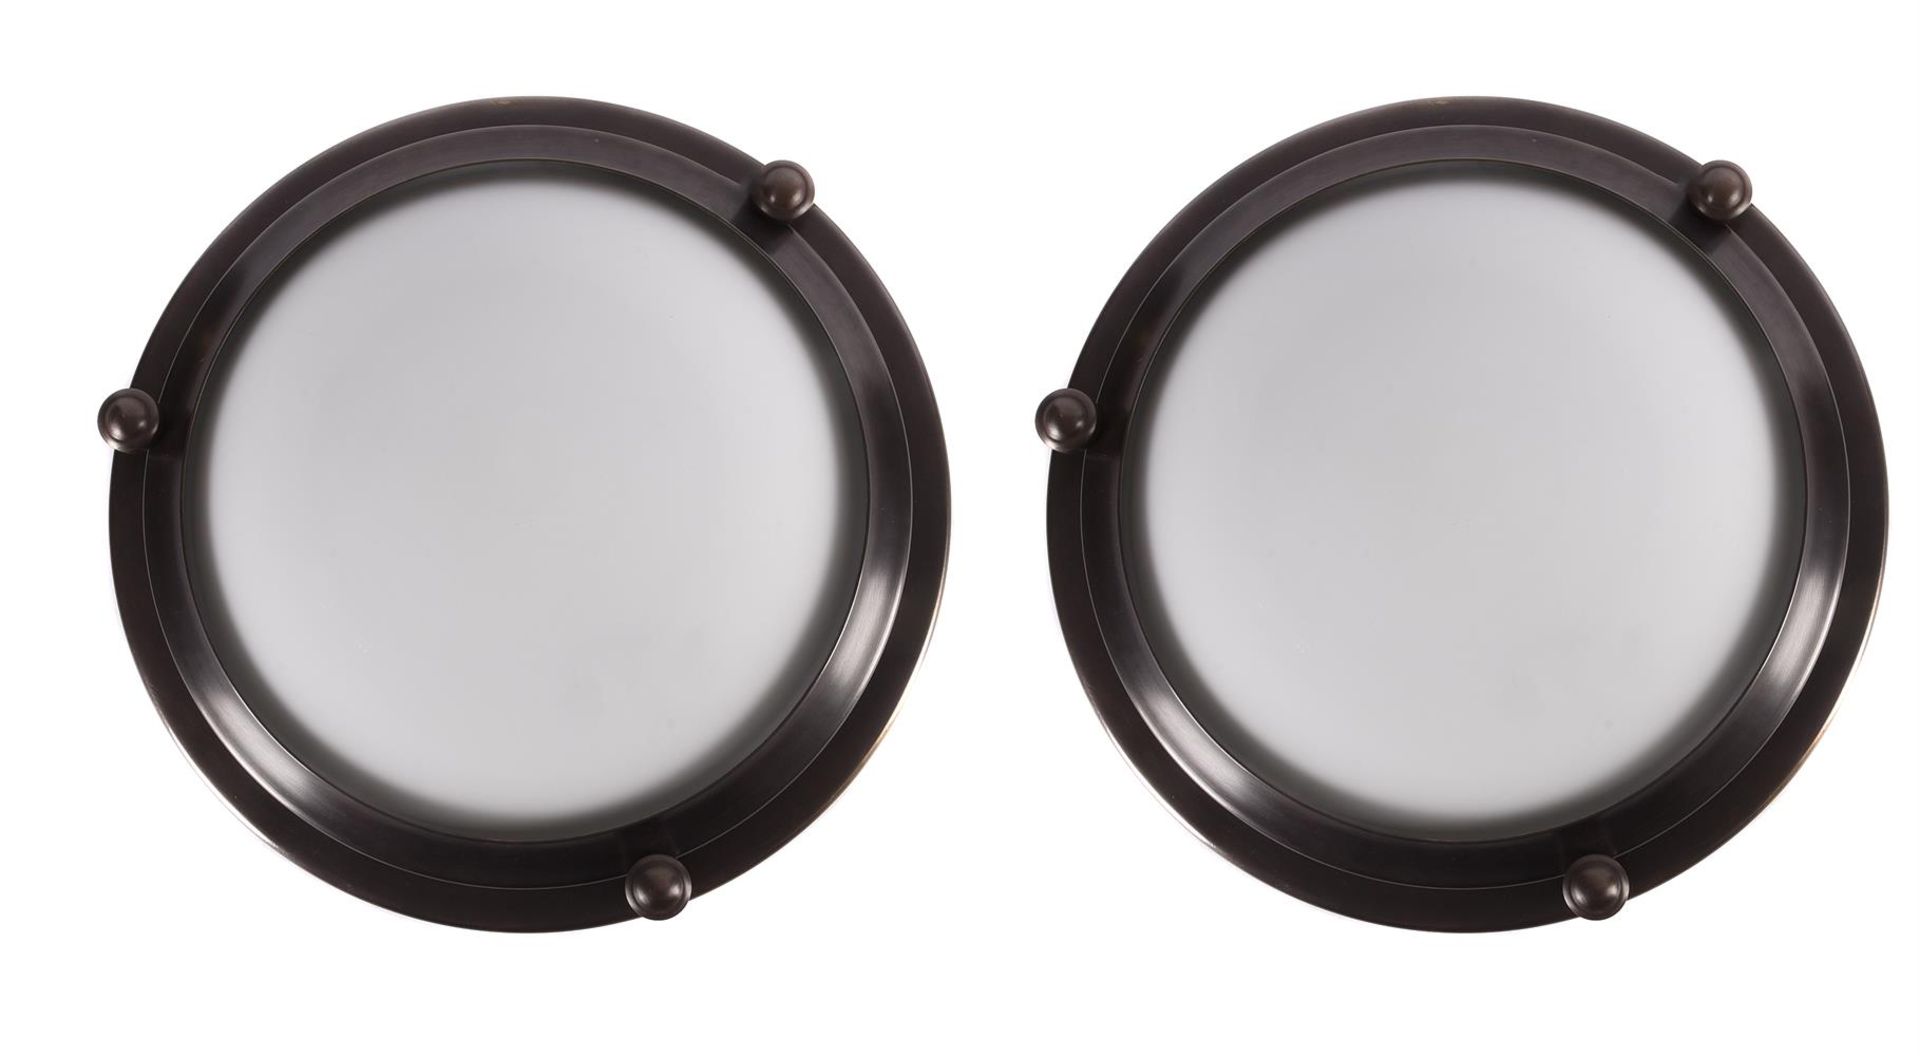 BESSELINK & JONES, A PAIR OF BRONZED METAL CEILING LIGHTS WITH FROSTED GLASS DOME SHADES